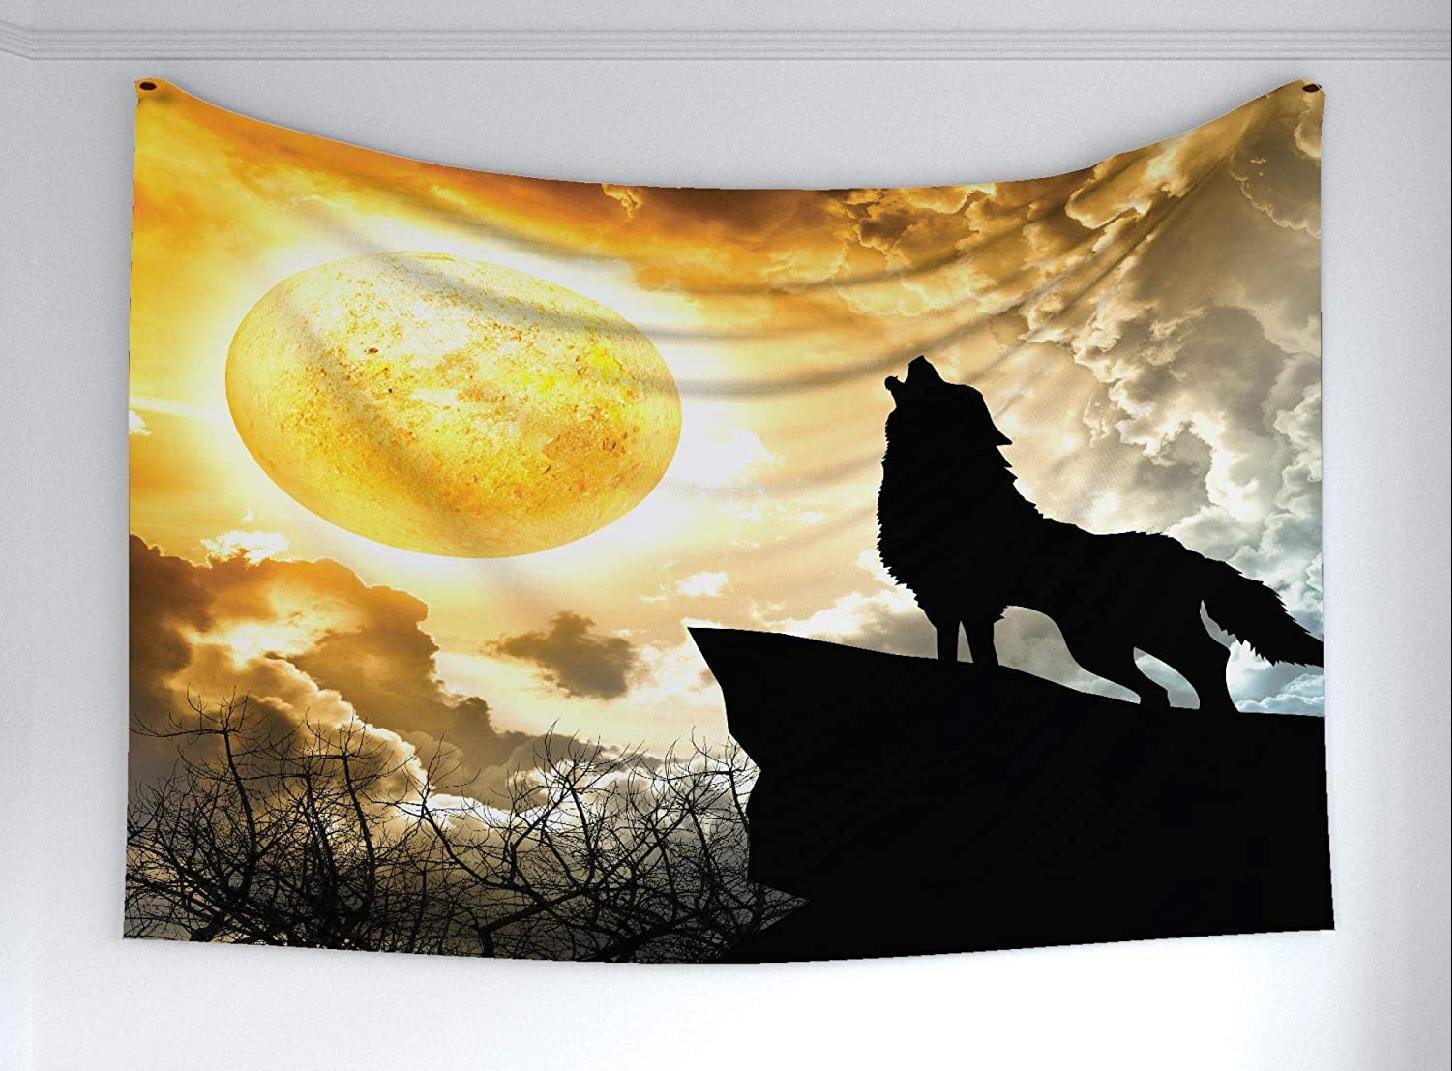 The Moon Wolf Wall Hanging Cotton Door Decor Tapestry Poster Bohemian Indian Art